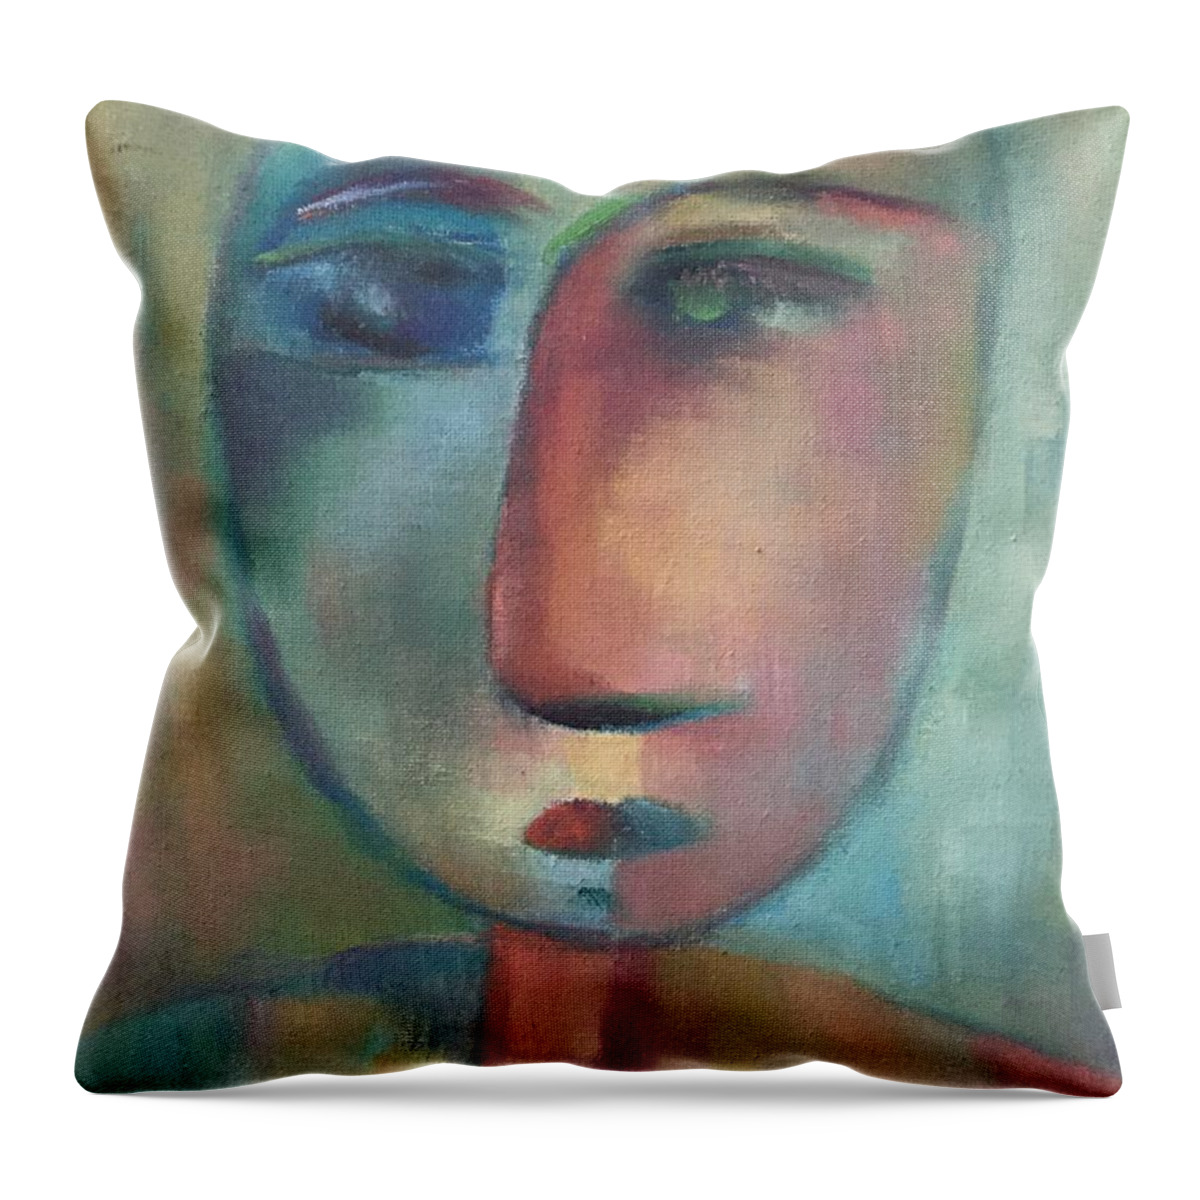 Two Faced Throw Pillow featuring the painting Two Faced by Kathy Stiber